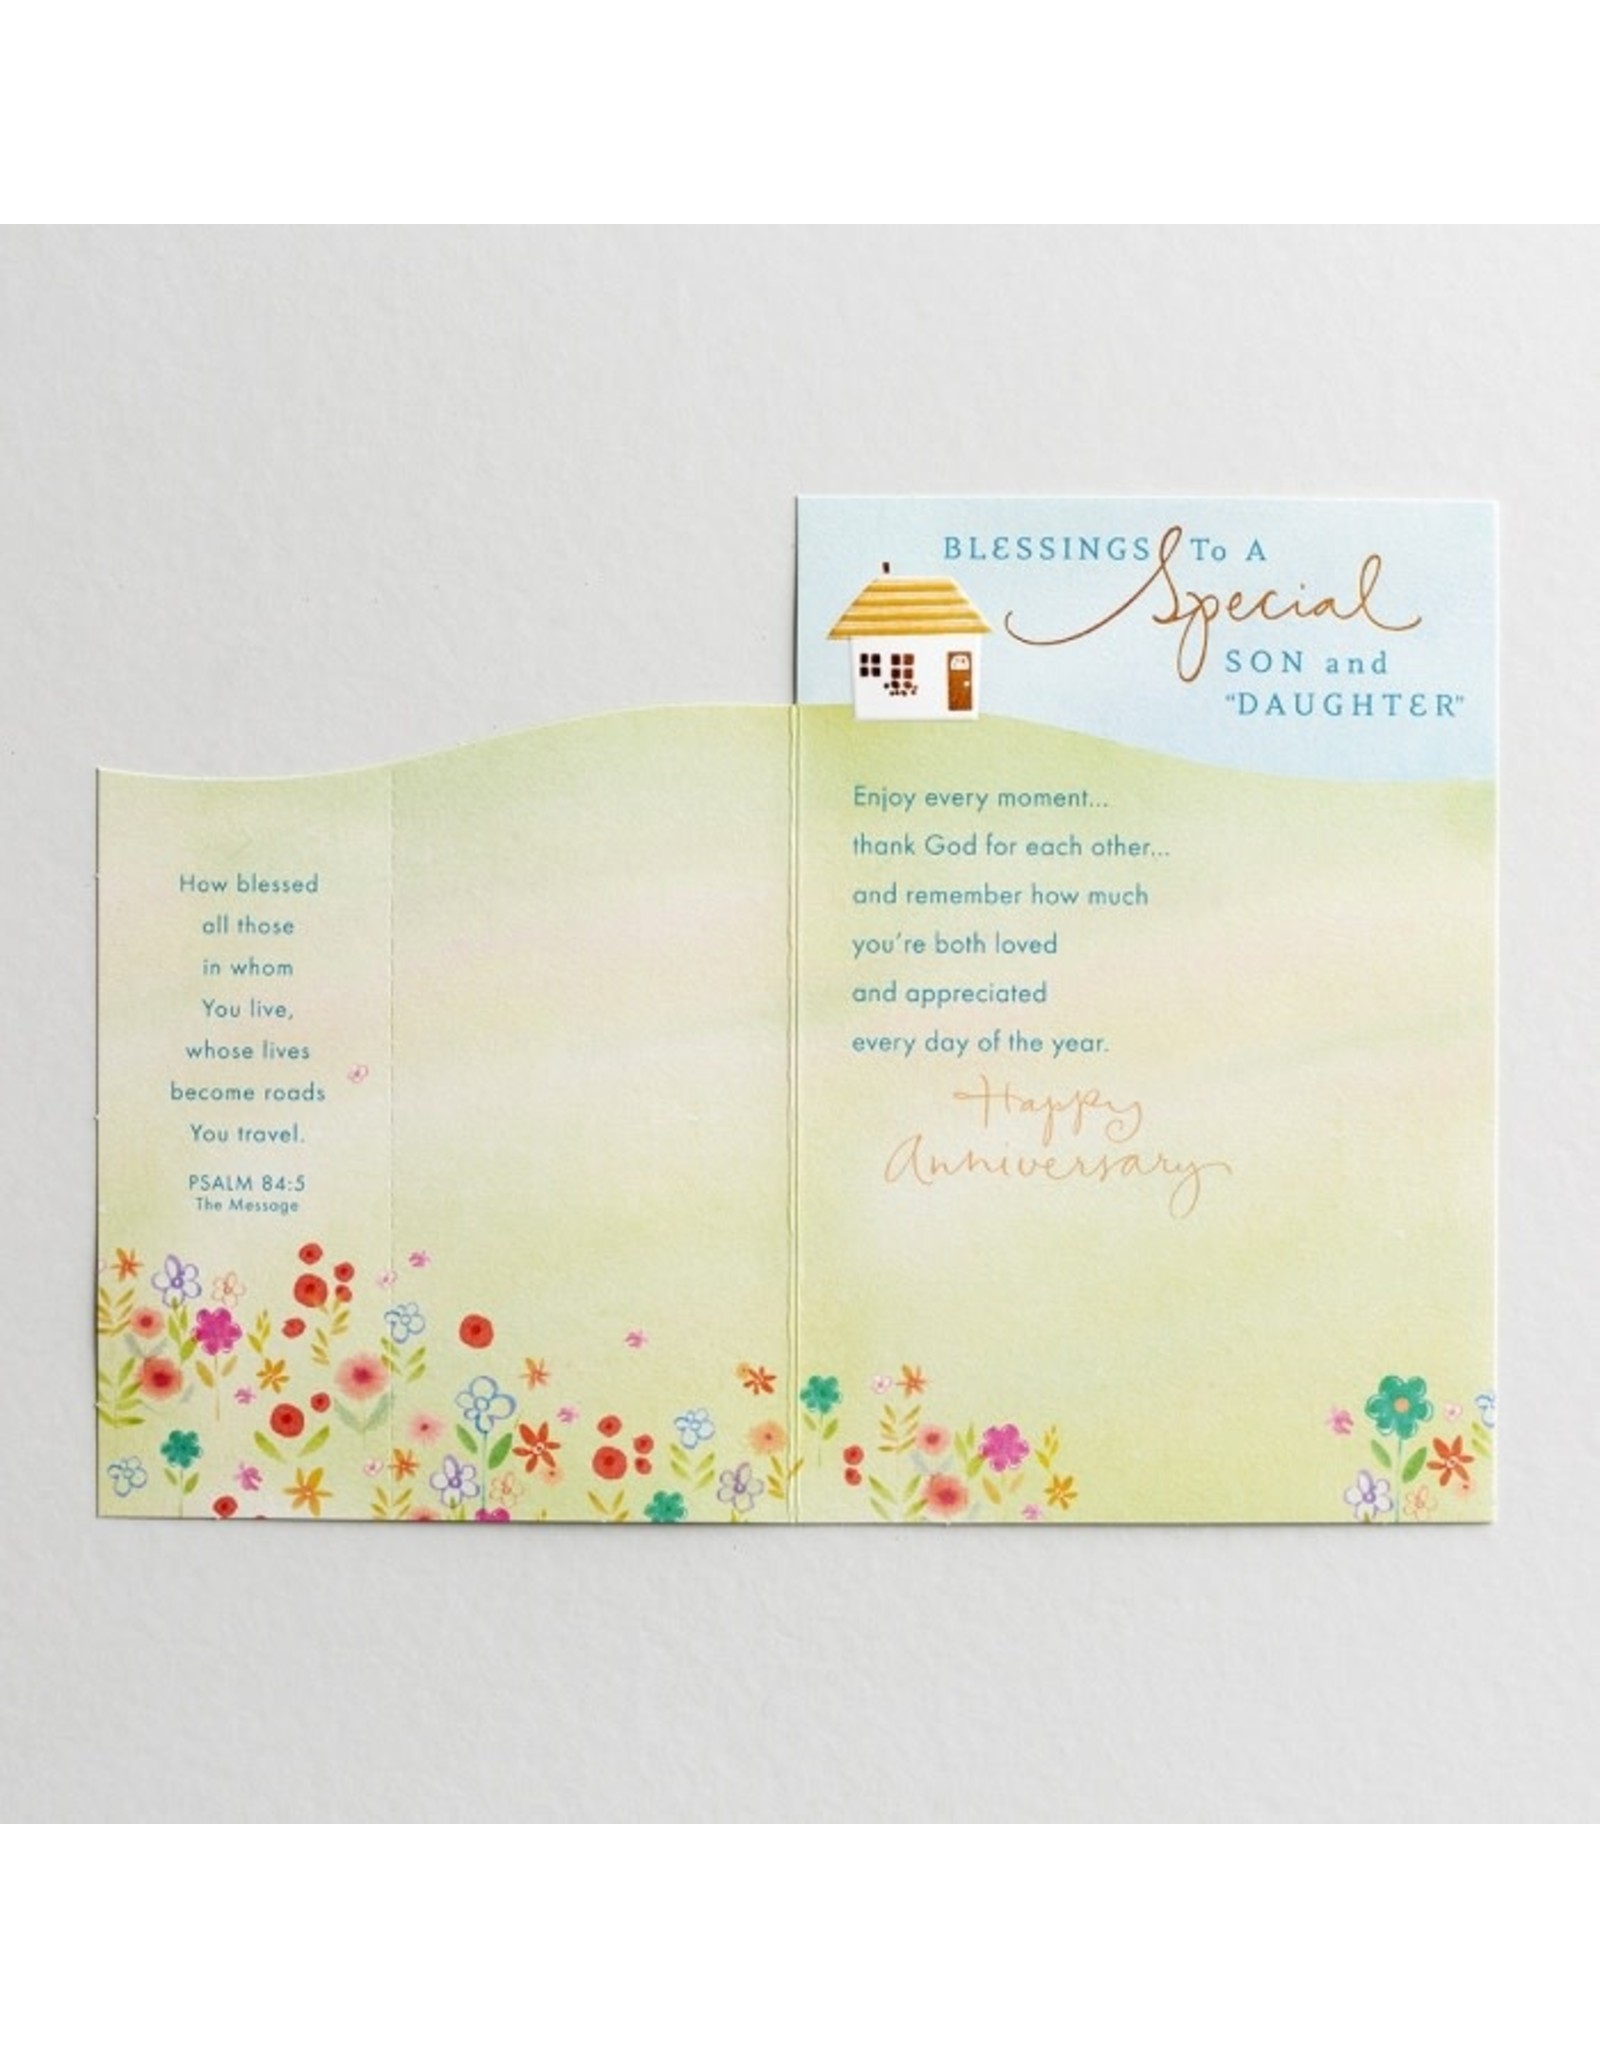 Dayspring Anniversary Card - For Son & Daughter-in-Law